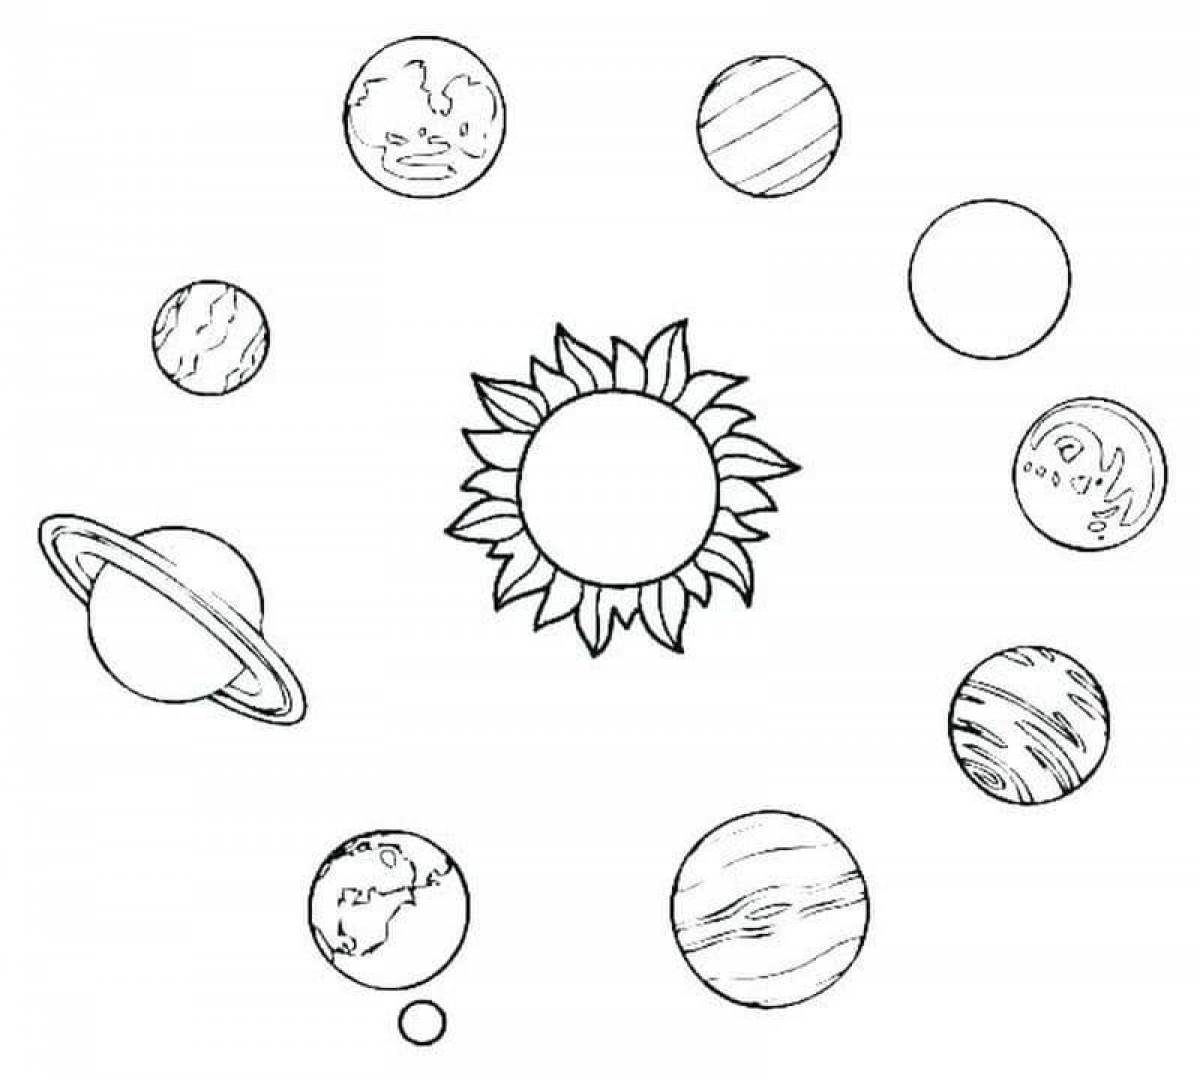 A fun coloring book for kids in the planets of the solar system